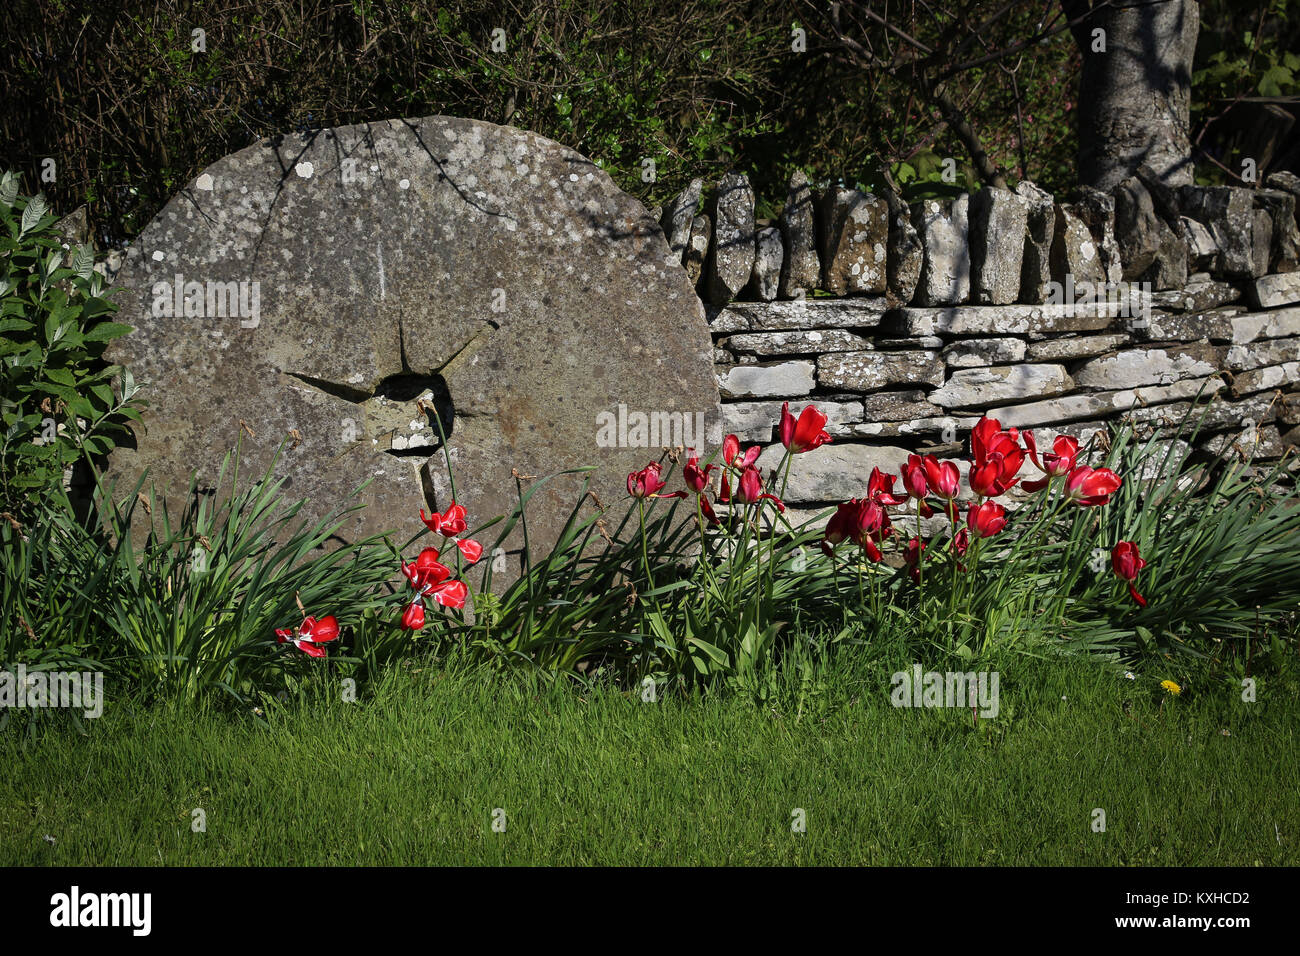 Old granite millstone resting against a dry stone wall in a garden, with red tulips, green grass on a sunny day; it's a nice garden feature, tranquil. Stock Photo